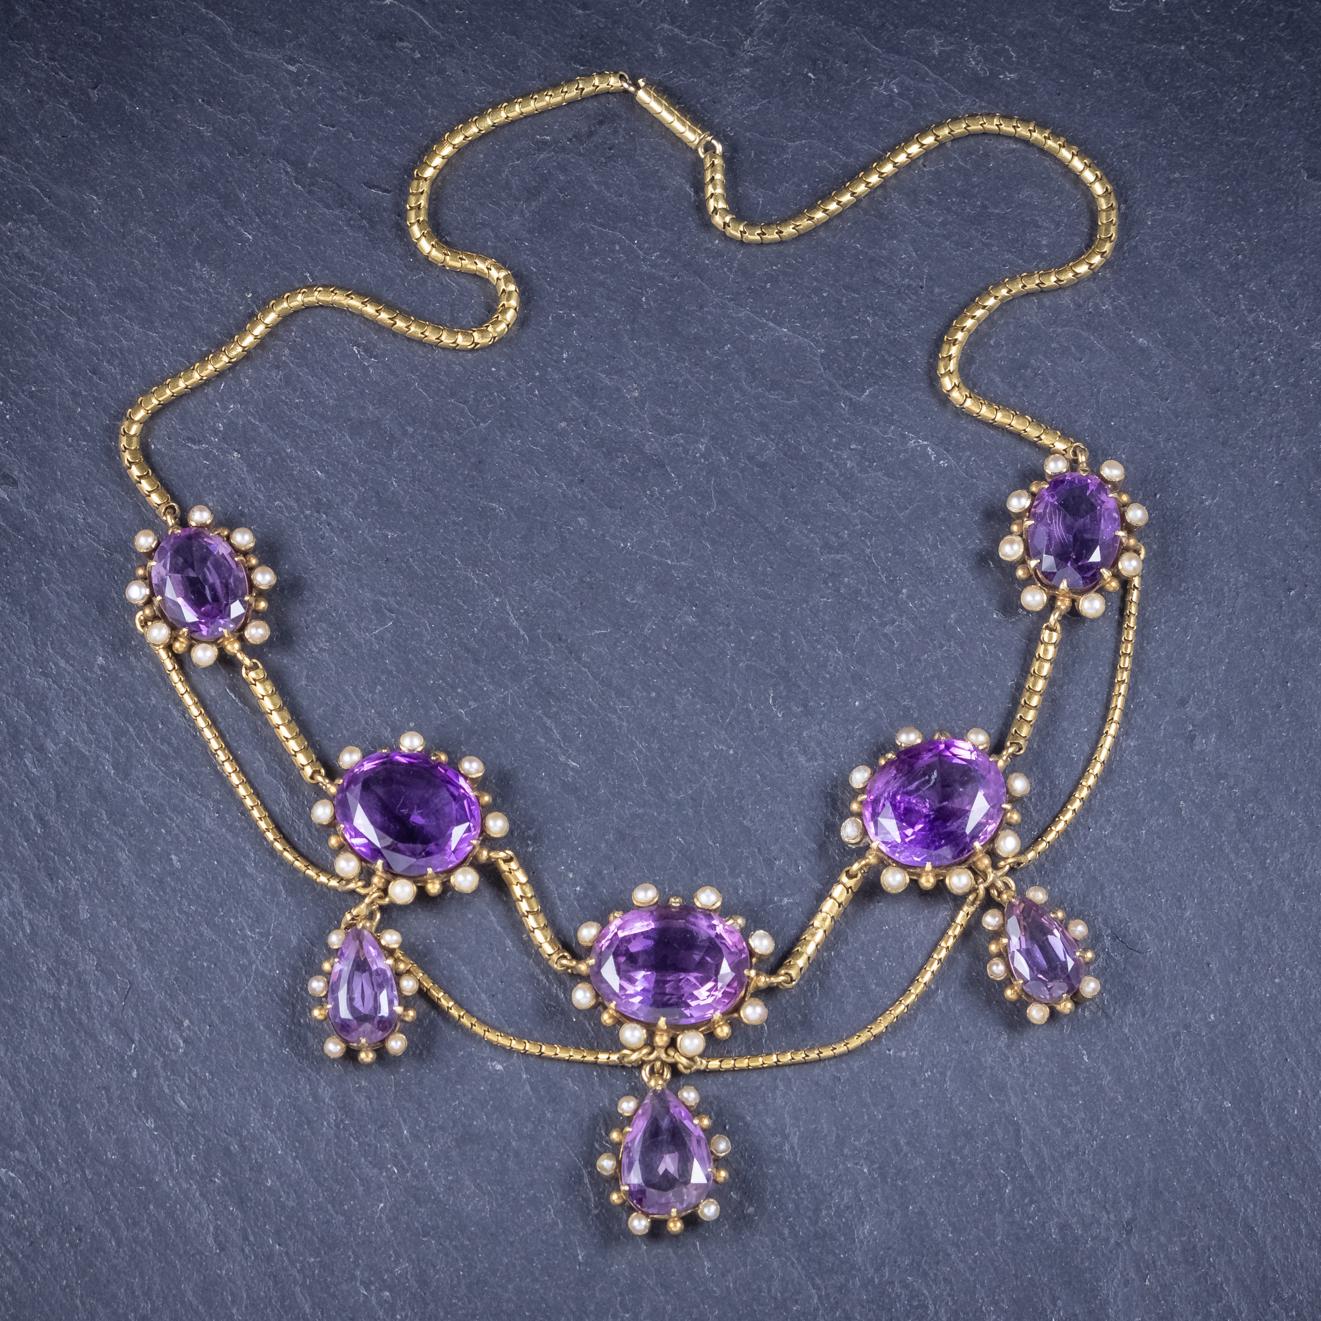 Antique Victorian Amethyst Pearl 18 Carat Gold, circa 1860 Garland Necklace For Sale 3